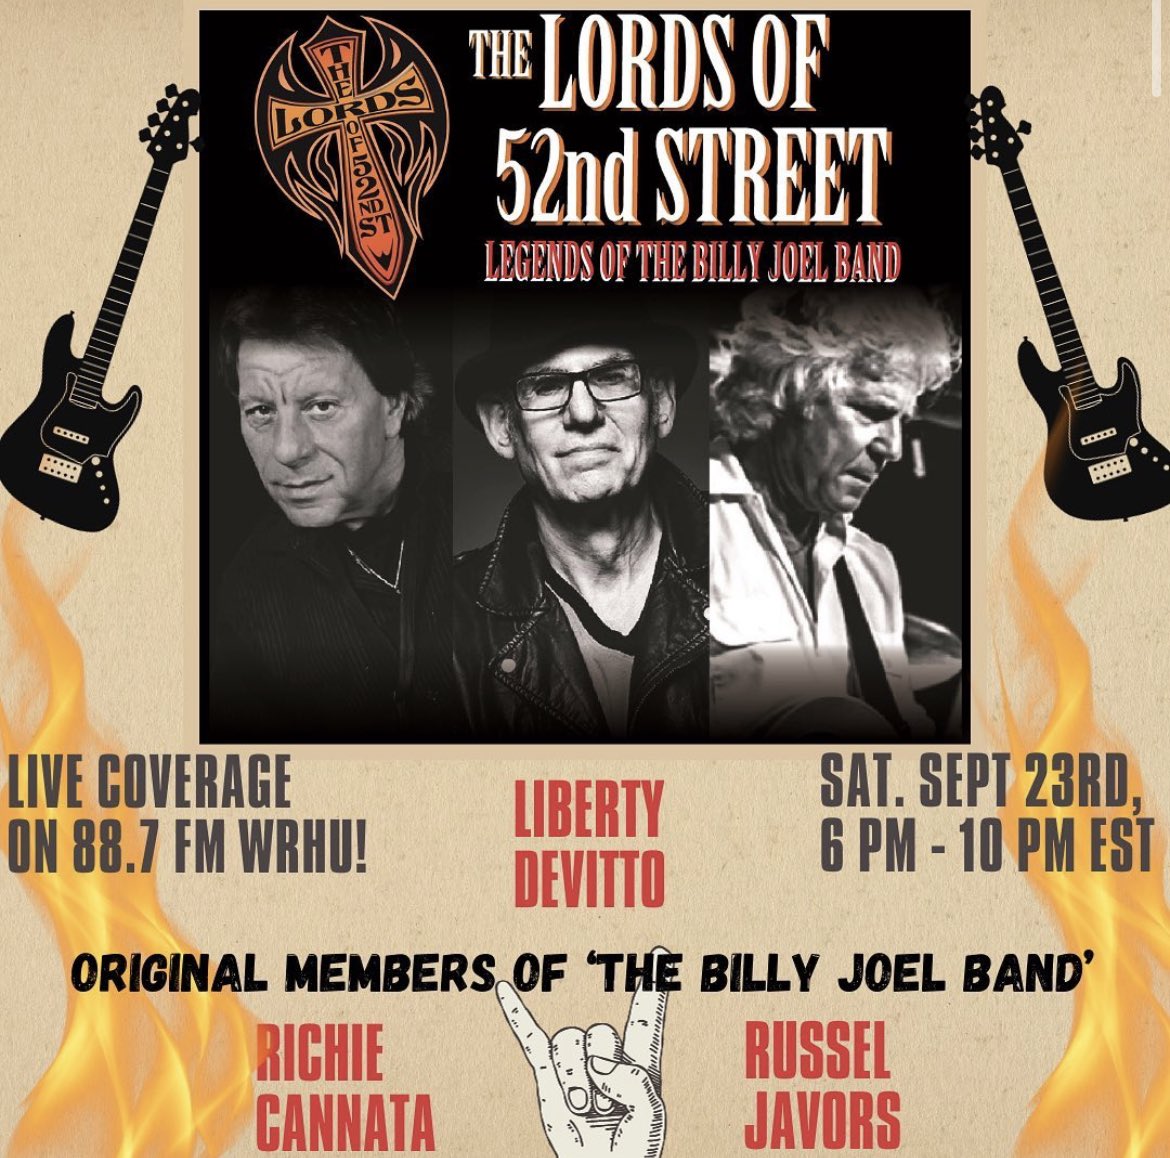 Here at WRHU we are truly in a “New York State of Mind”! A live concert comes to you this Saturday, September 23rd with “The Lords of 52nd Street!” WRHU will be airing the concert live from 6 PM to 10 PM EST only on 88.7 FM WRHU!